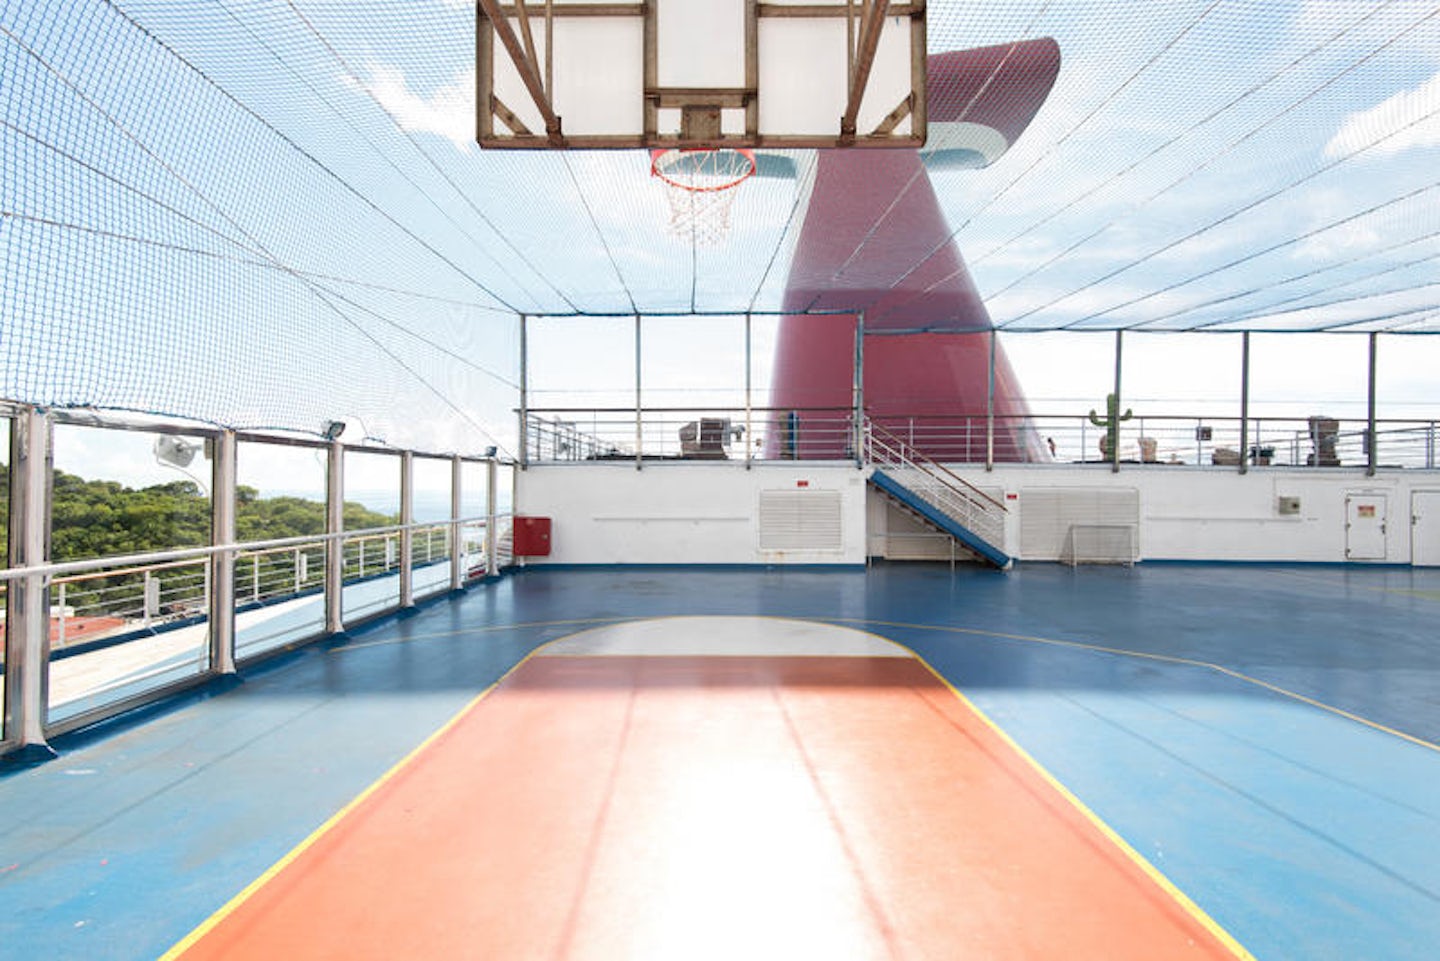 Sports Deck on Carnival Liberty